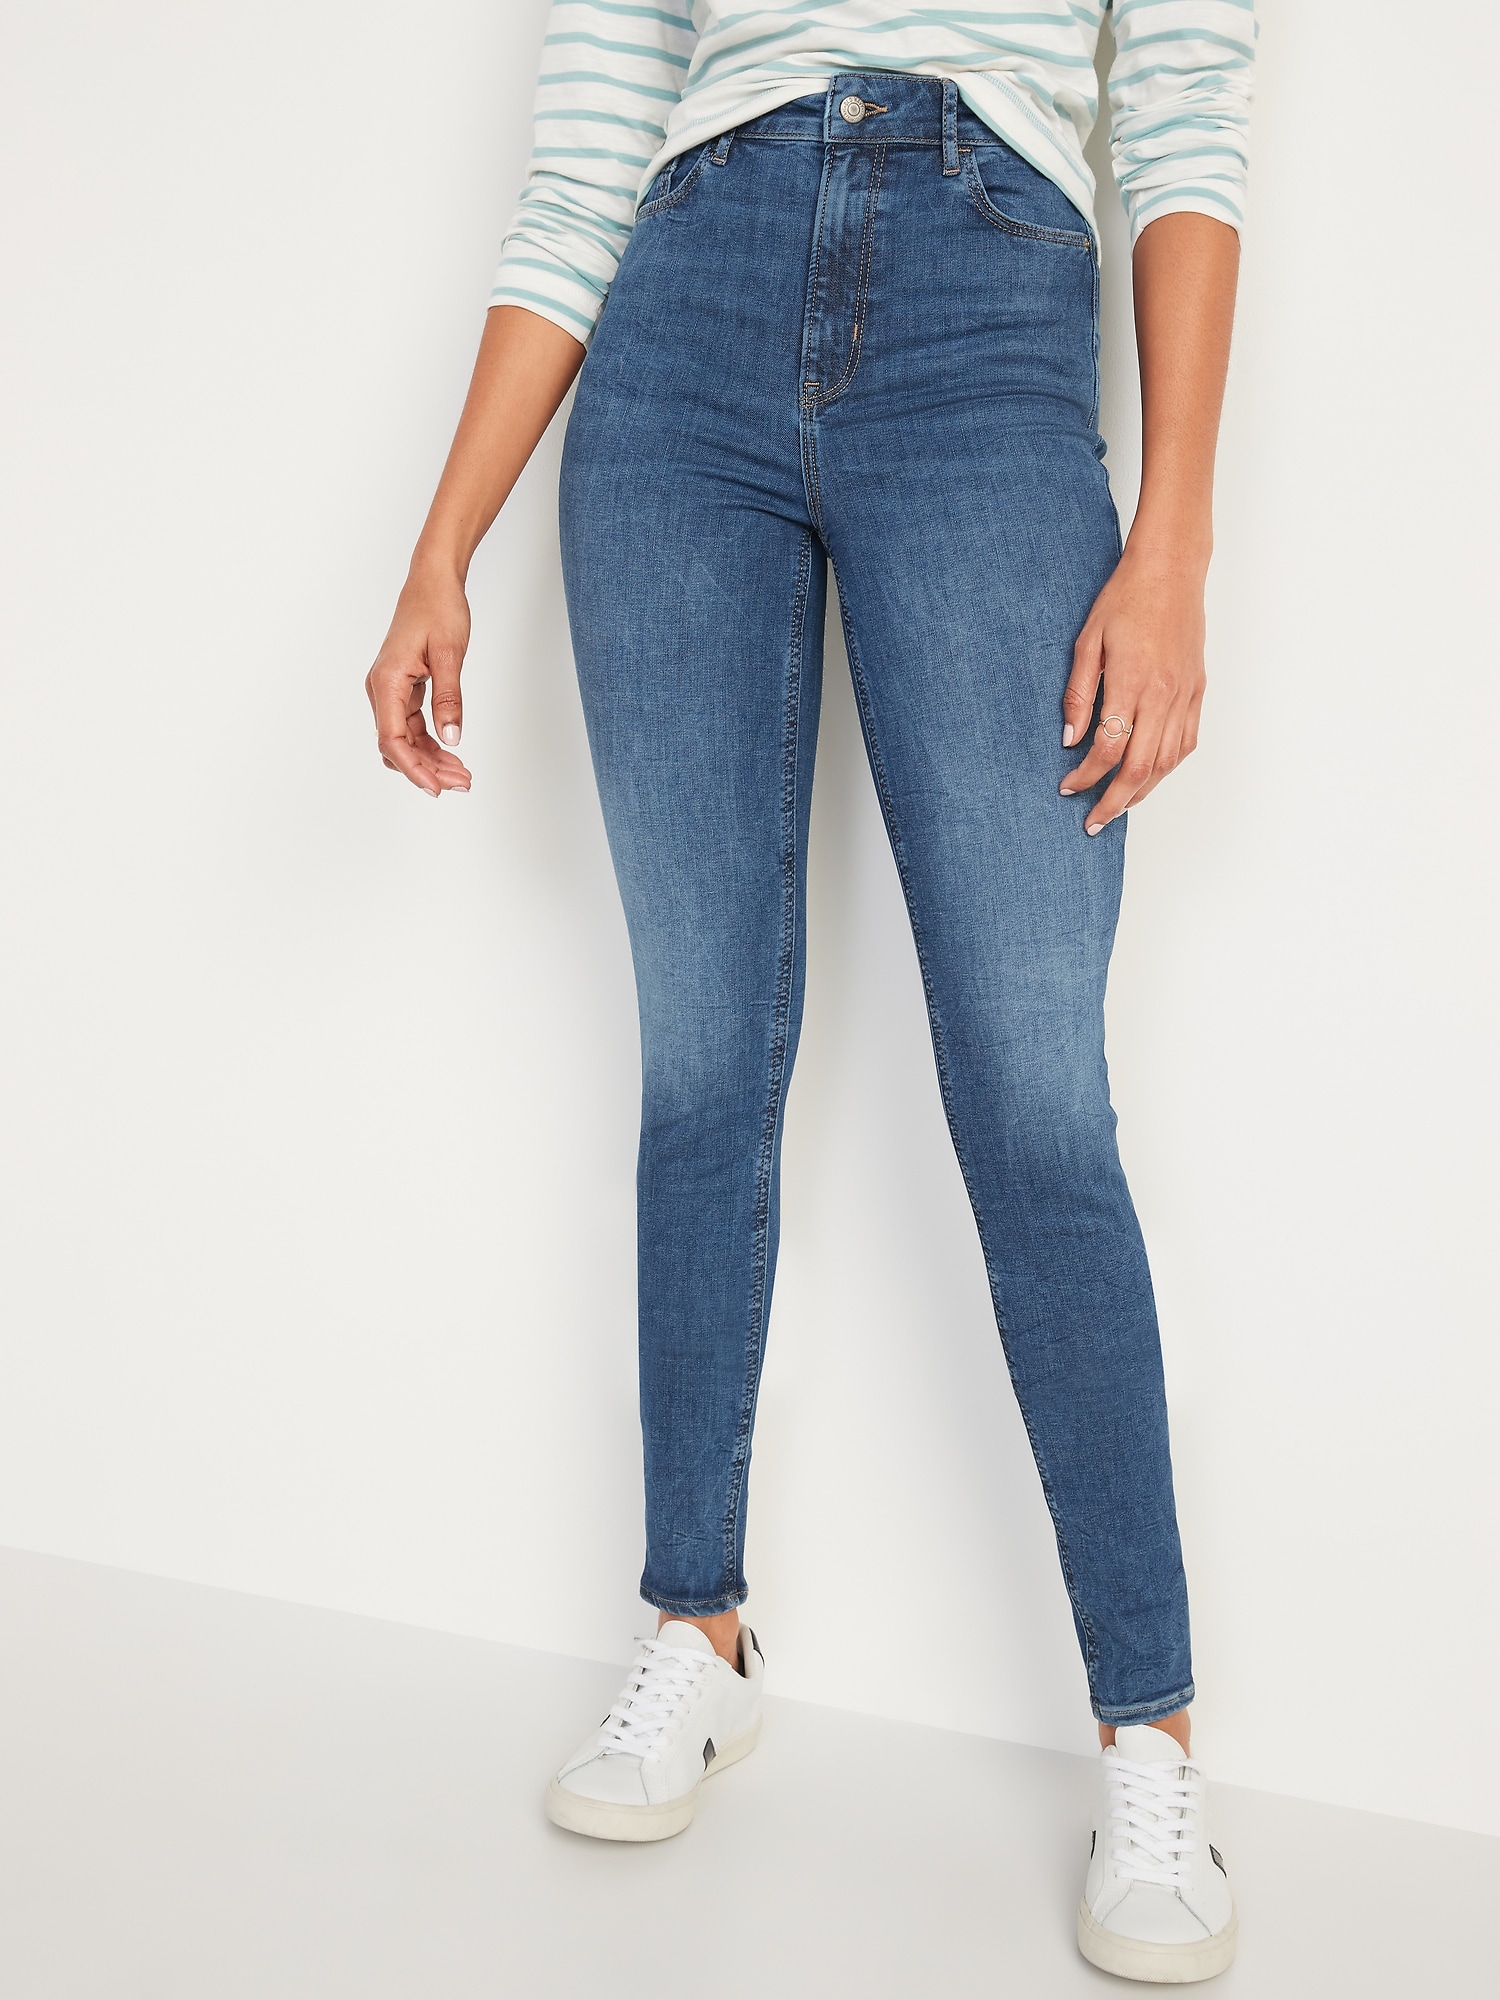 FitsYou 3-Sizes-in-1 Extra High-Waisted Rockstar Super Skinny Jeans for  Women | Old Navy